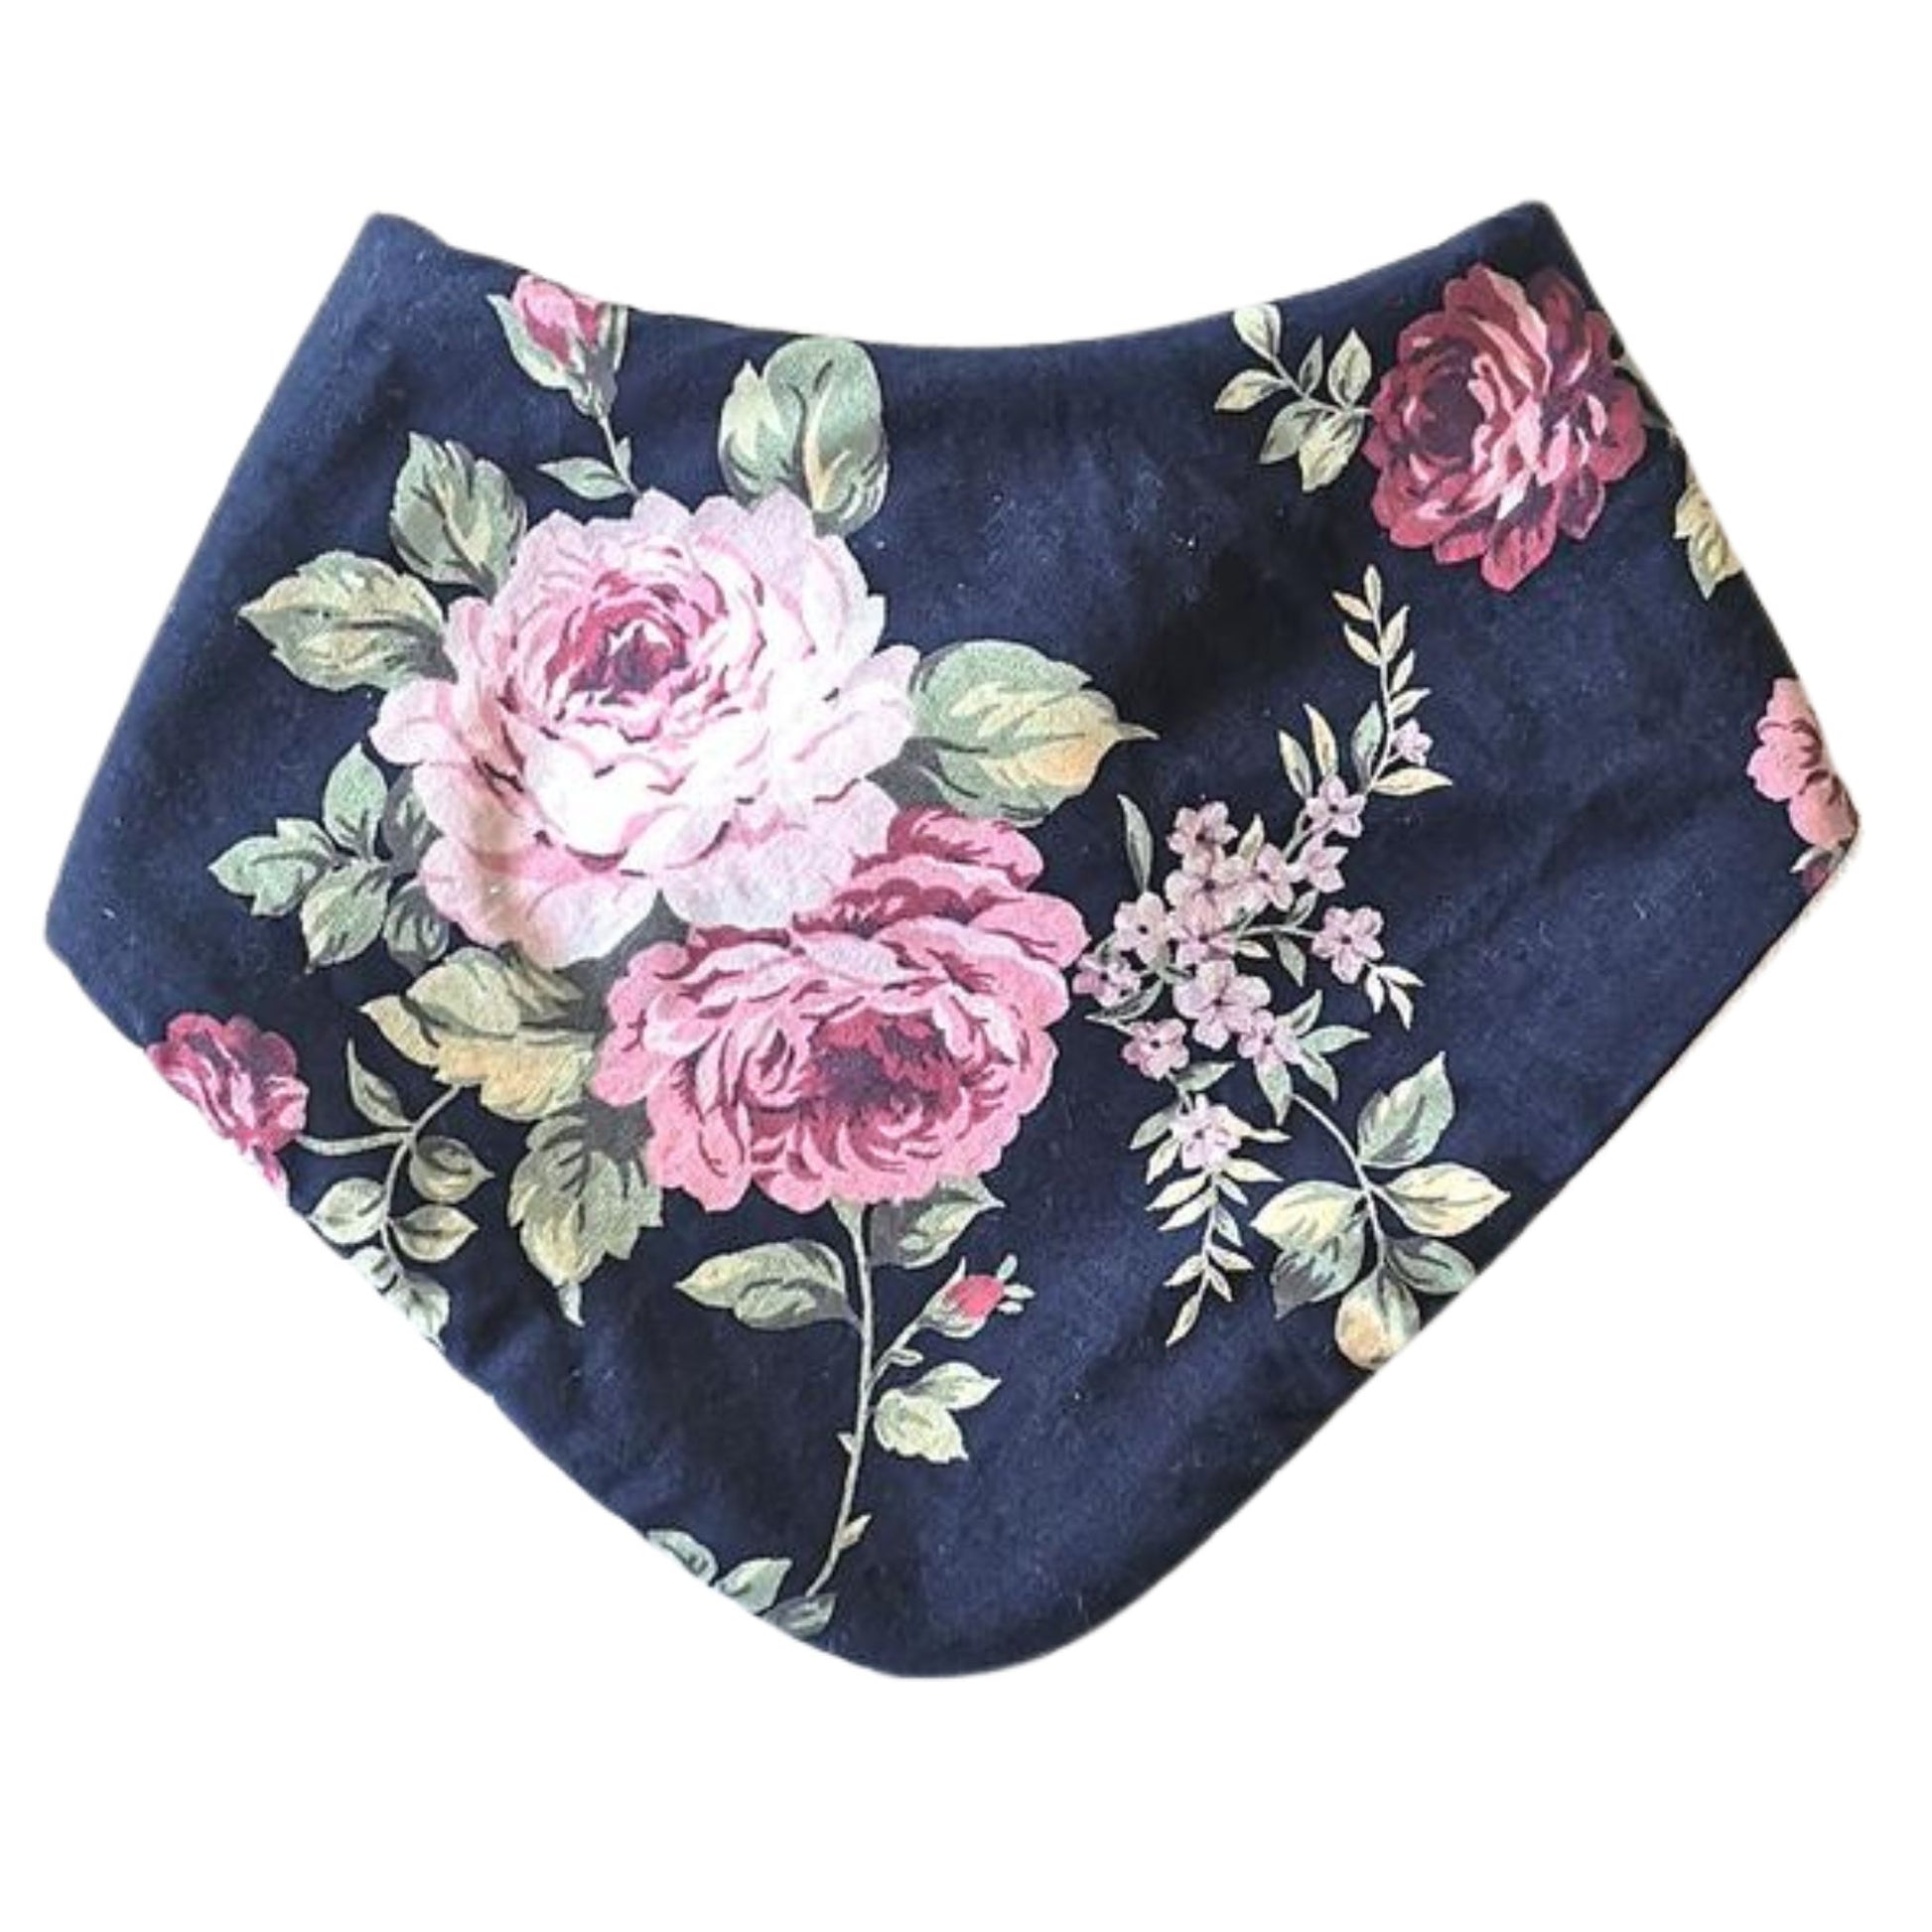 Lovely hand made baby bib with Rose print with navy blue background.